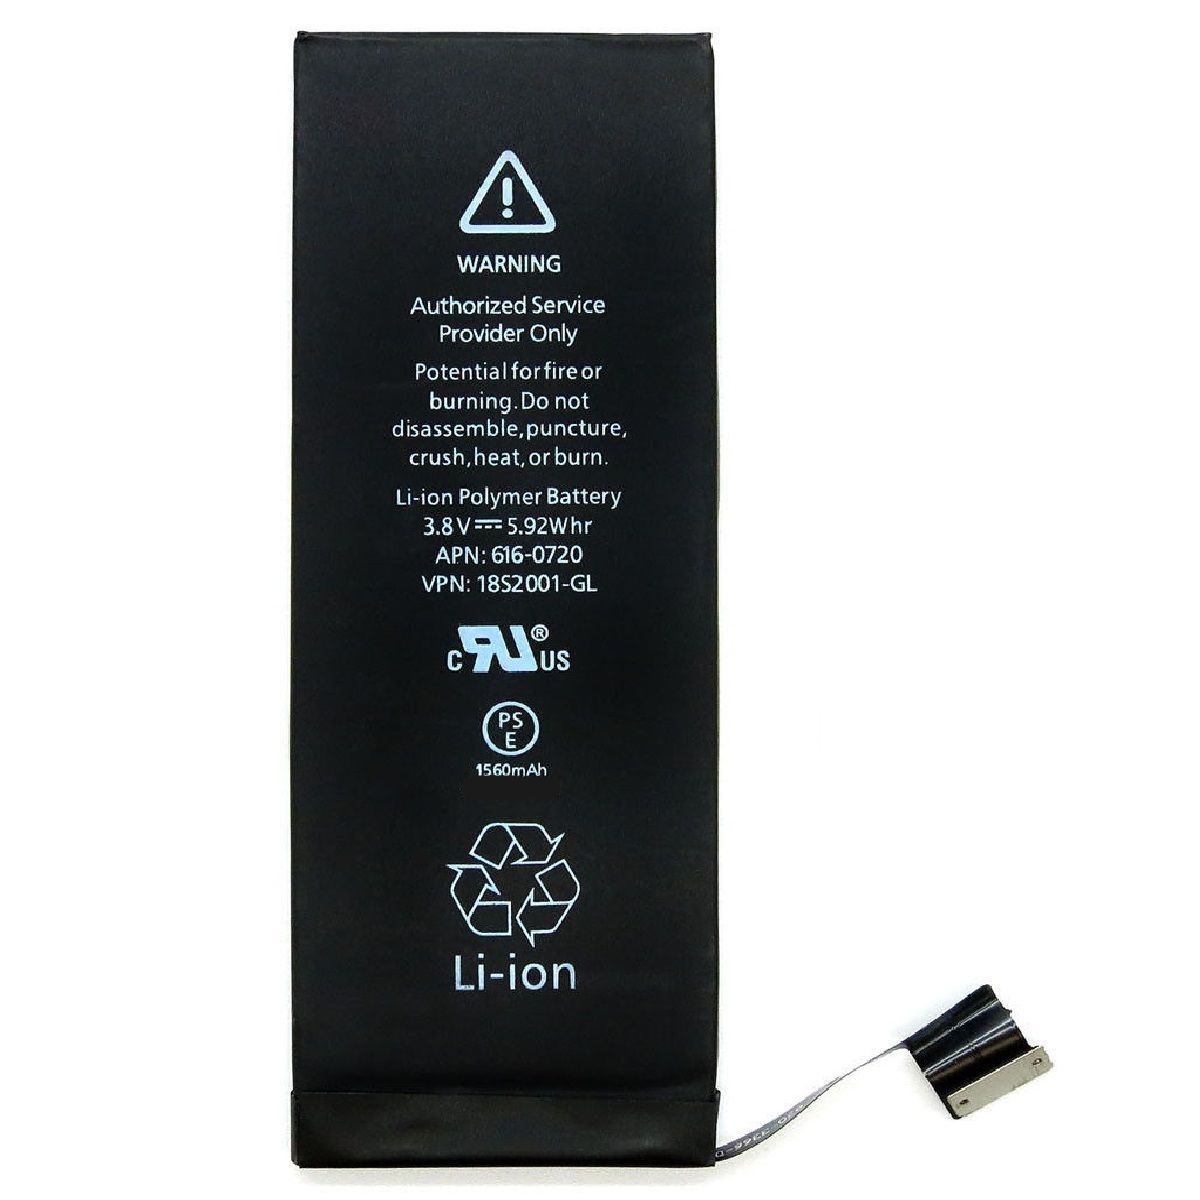 iPhone 5S battery